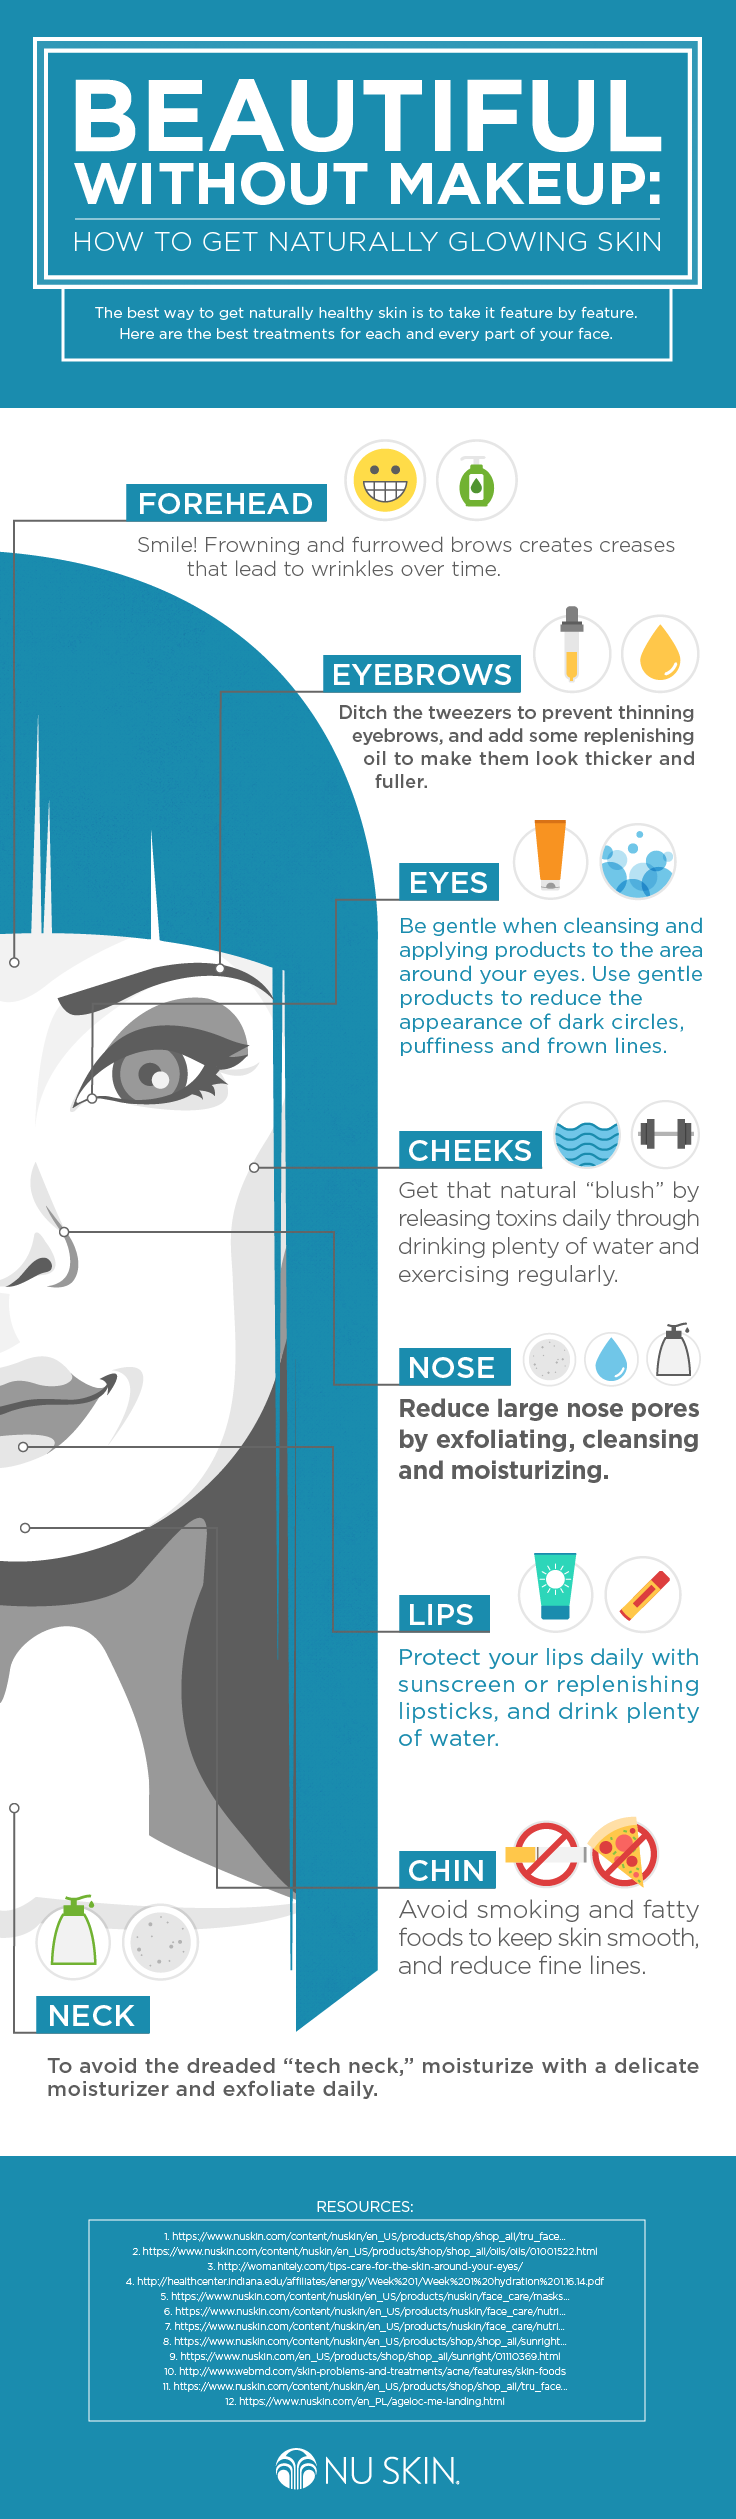 Nu Skin's infographic with eight tips on how to be beautiful without makeup